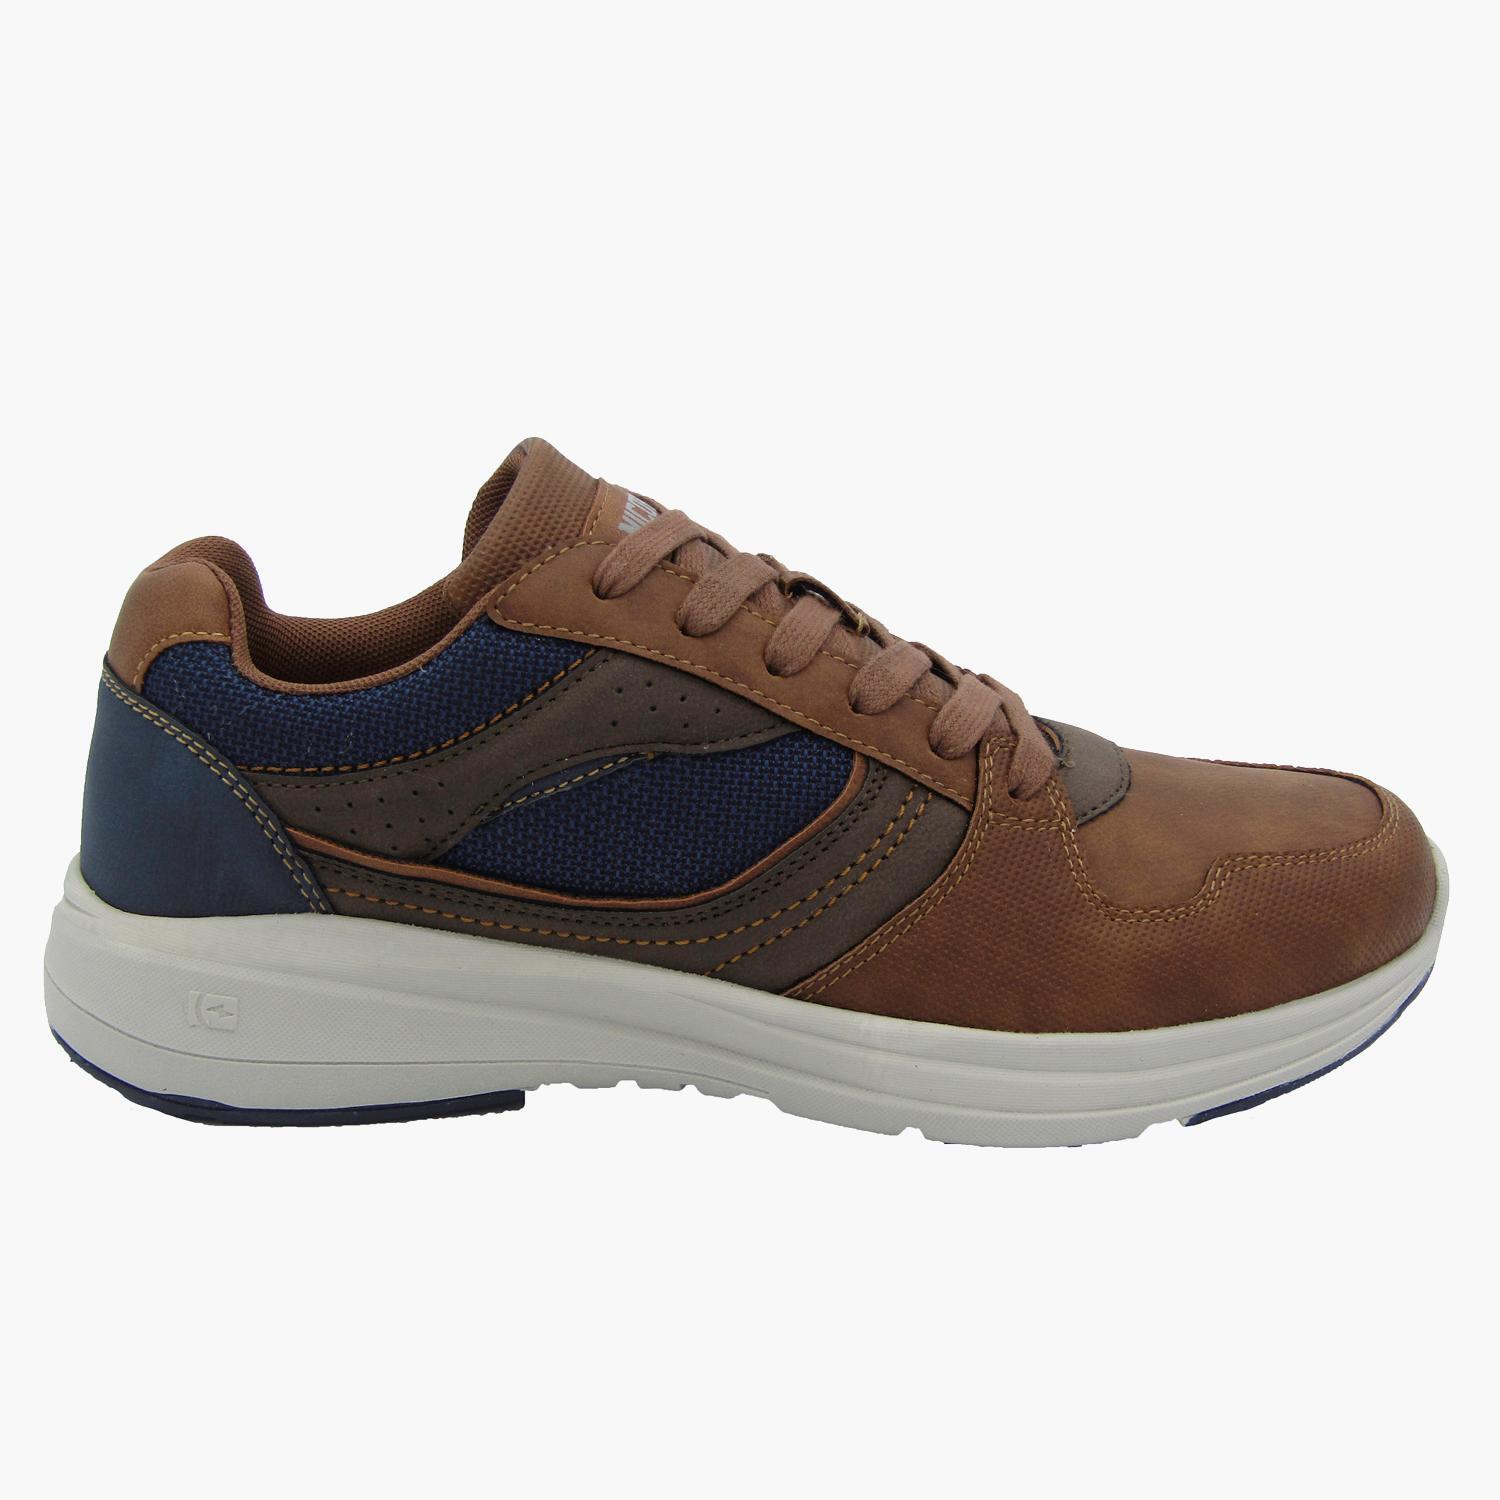 Nicobocco Romulo - Marron - Chaussures homme sports taille 45